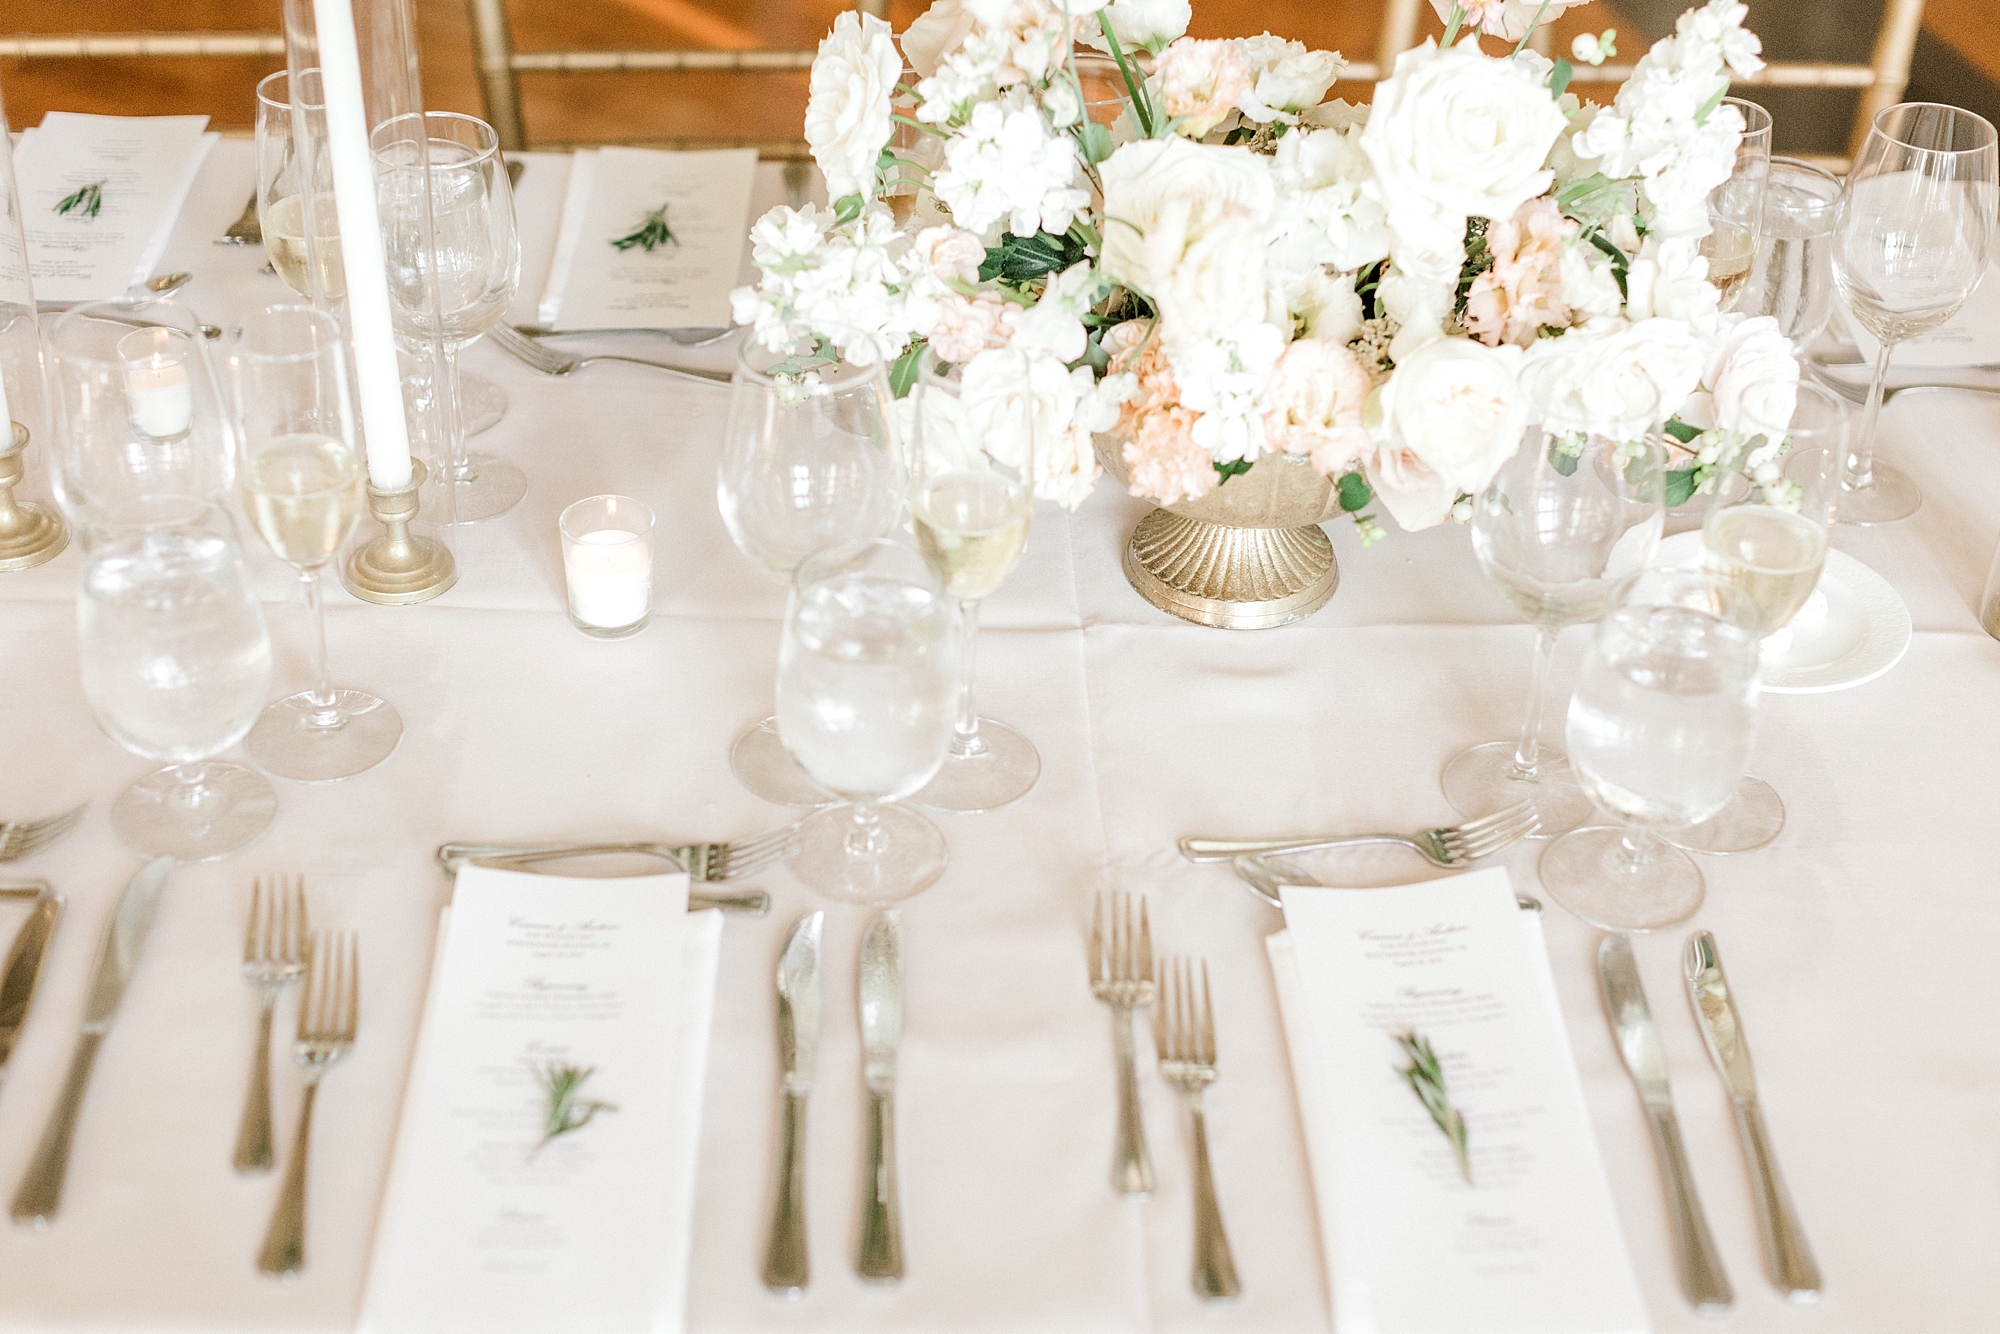 gold, white, and pink place settings in front of white and pink flower centerpieces